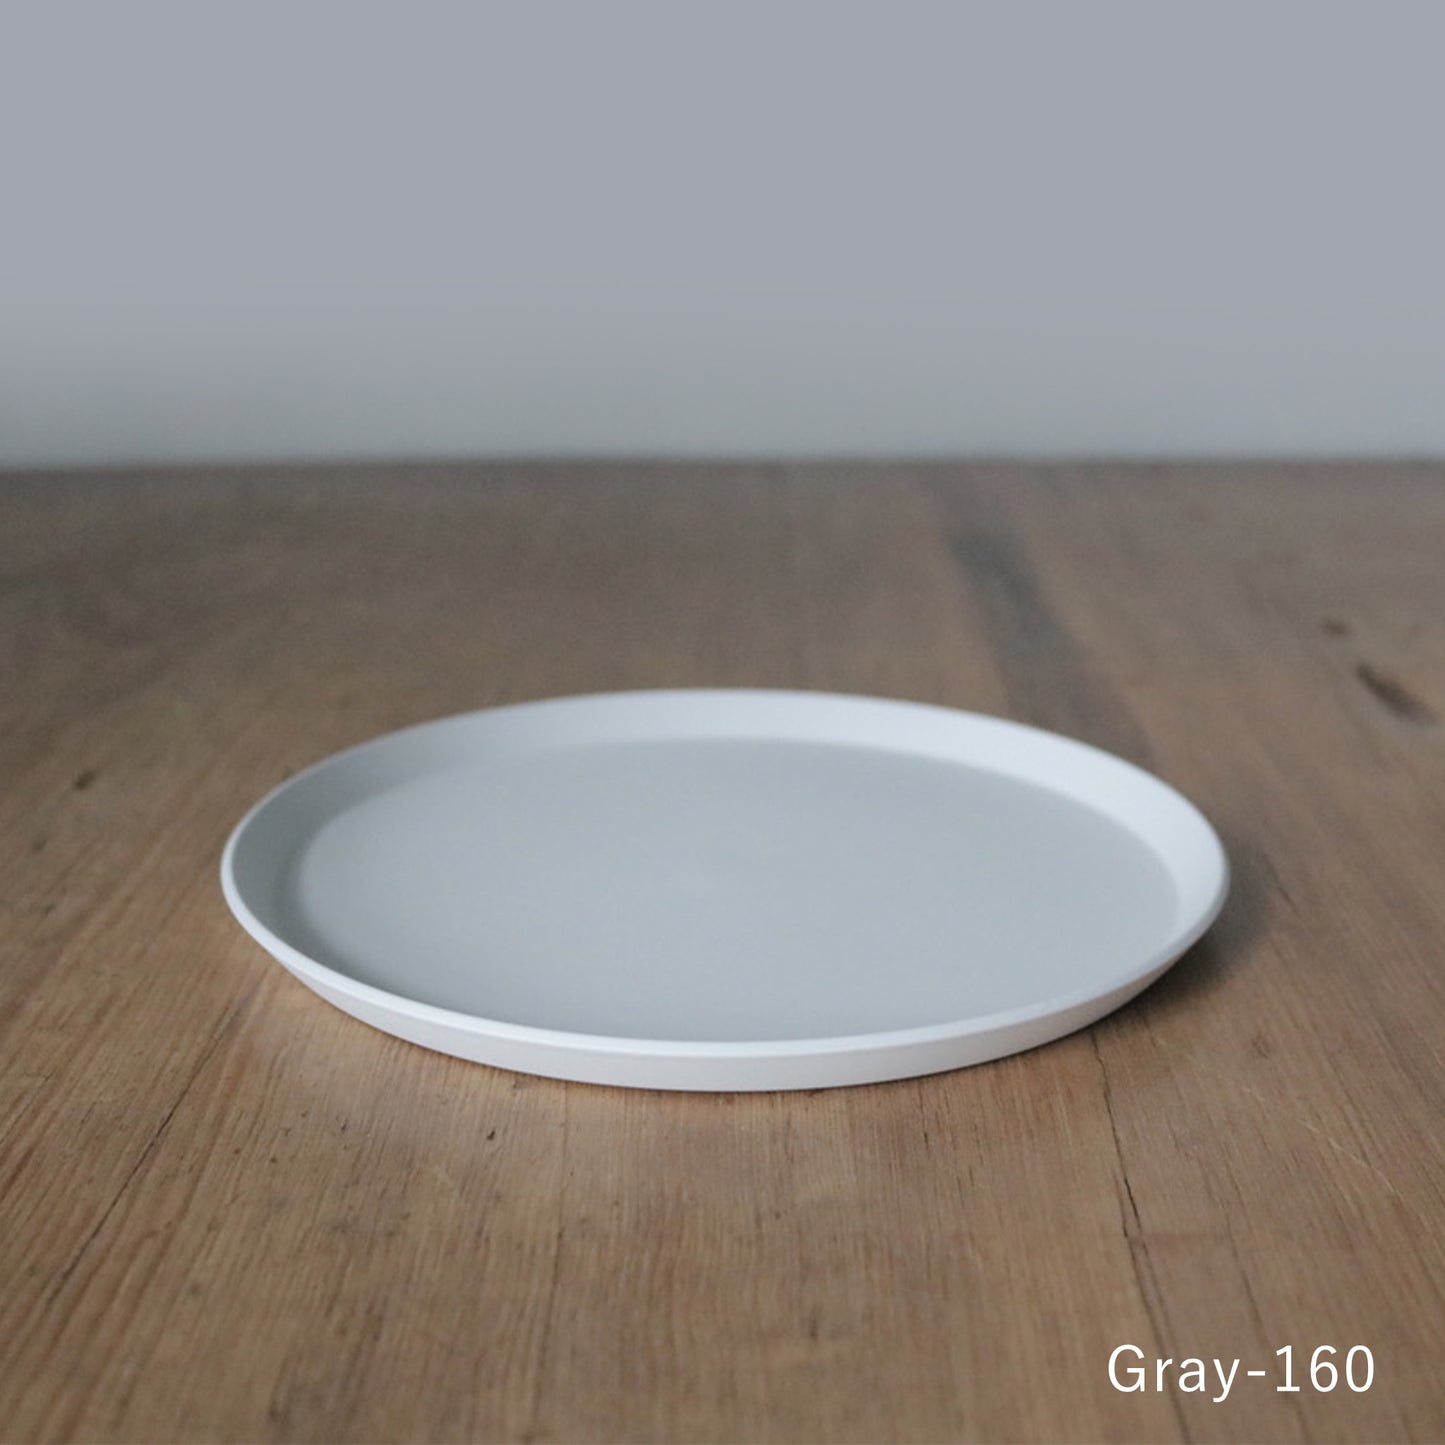 TY Round Plate